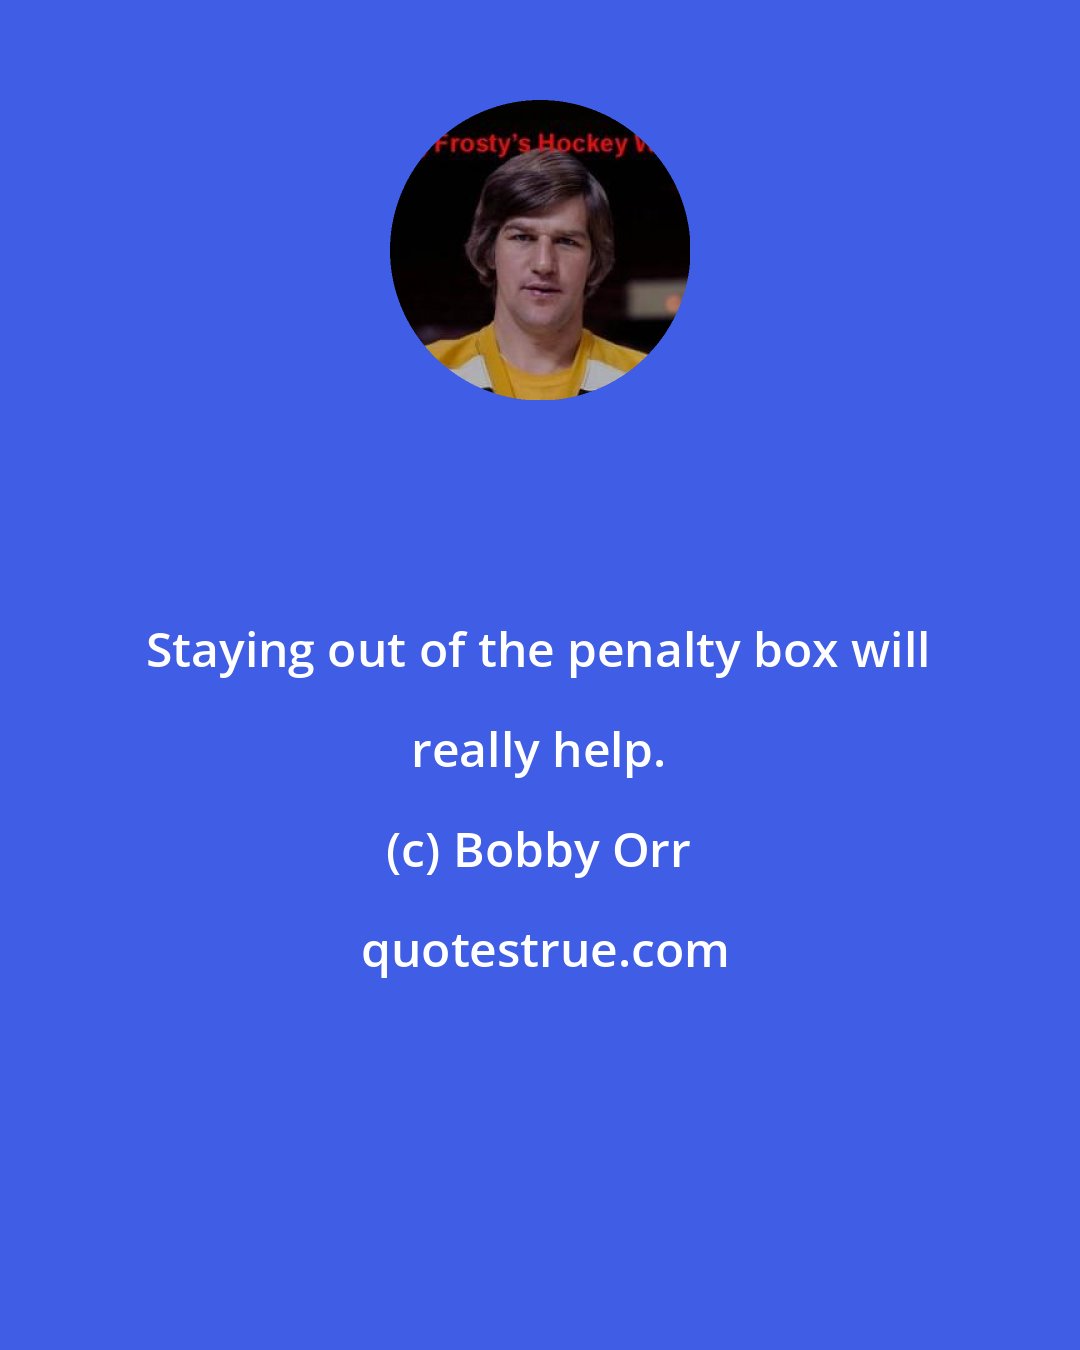 Bobby Orr: Staying out of the penalty box will really help.